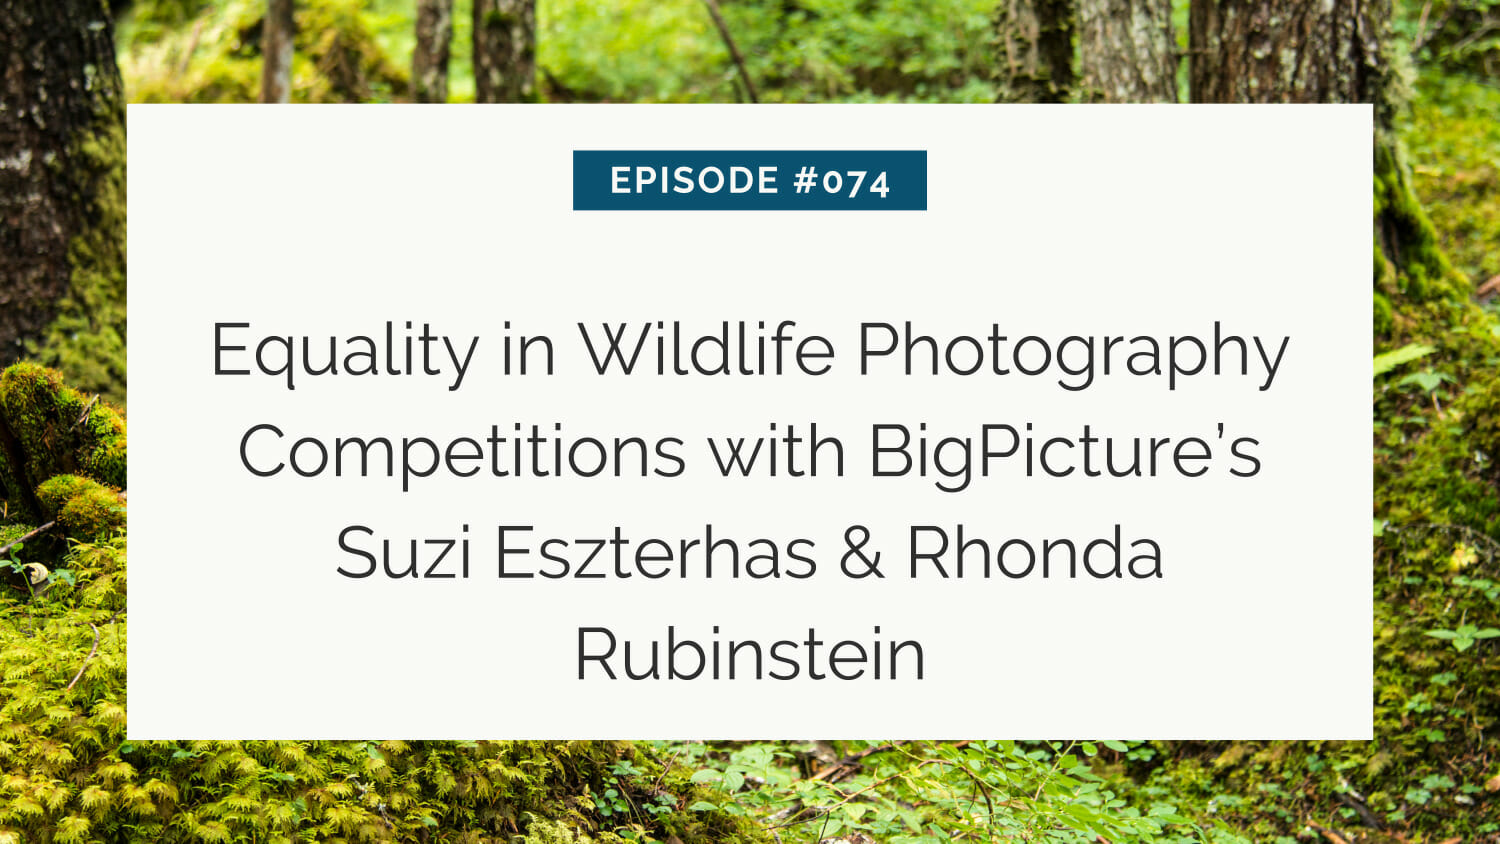 Podcast episode graphic for "episode #074 - equality in wildlife photography competitions with bigpicture's suzi eszterhas & rhonda rubinstein" set against a backdrop of a green forest.